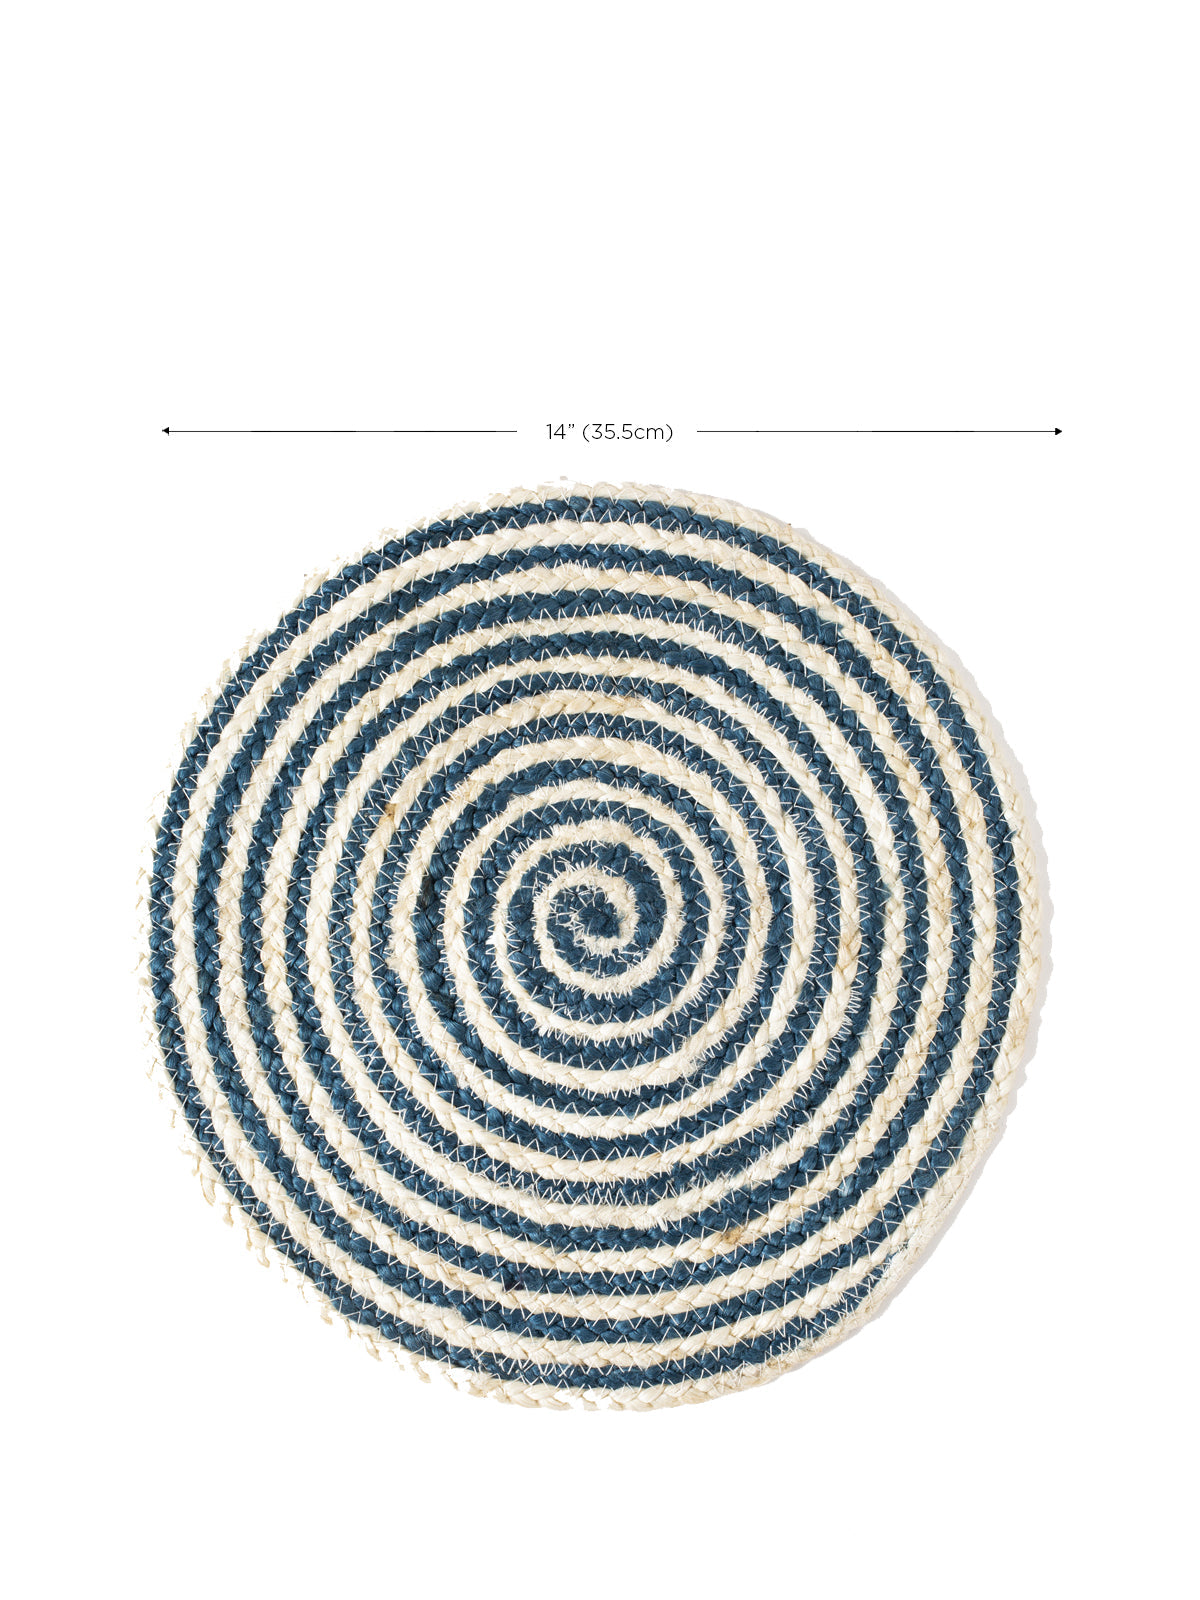 Kata Spiral Placemat, Off-white and blue (Set of 4)